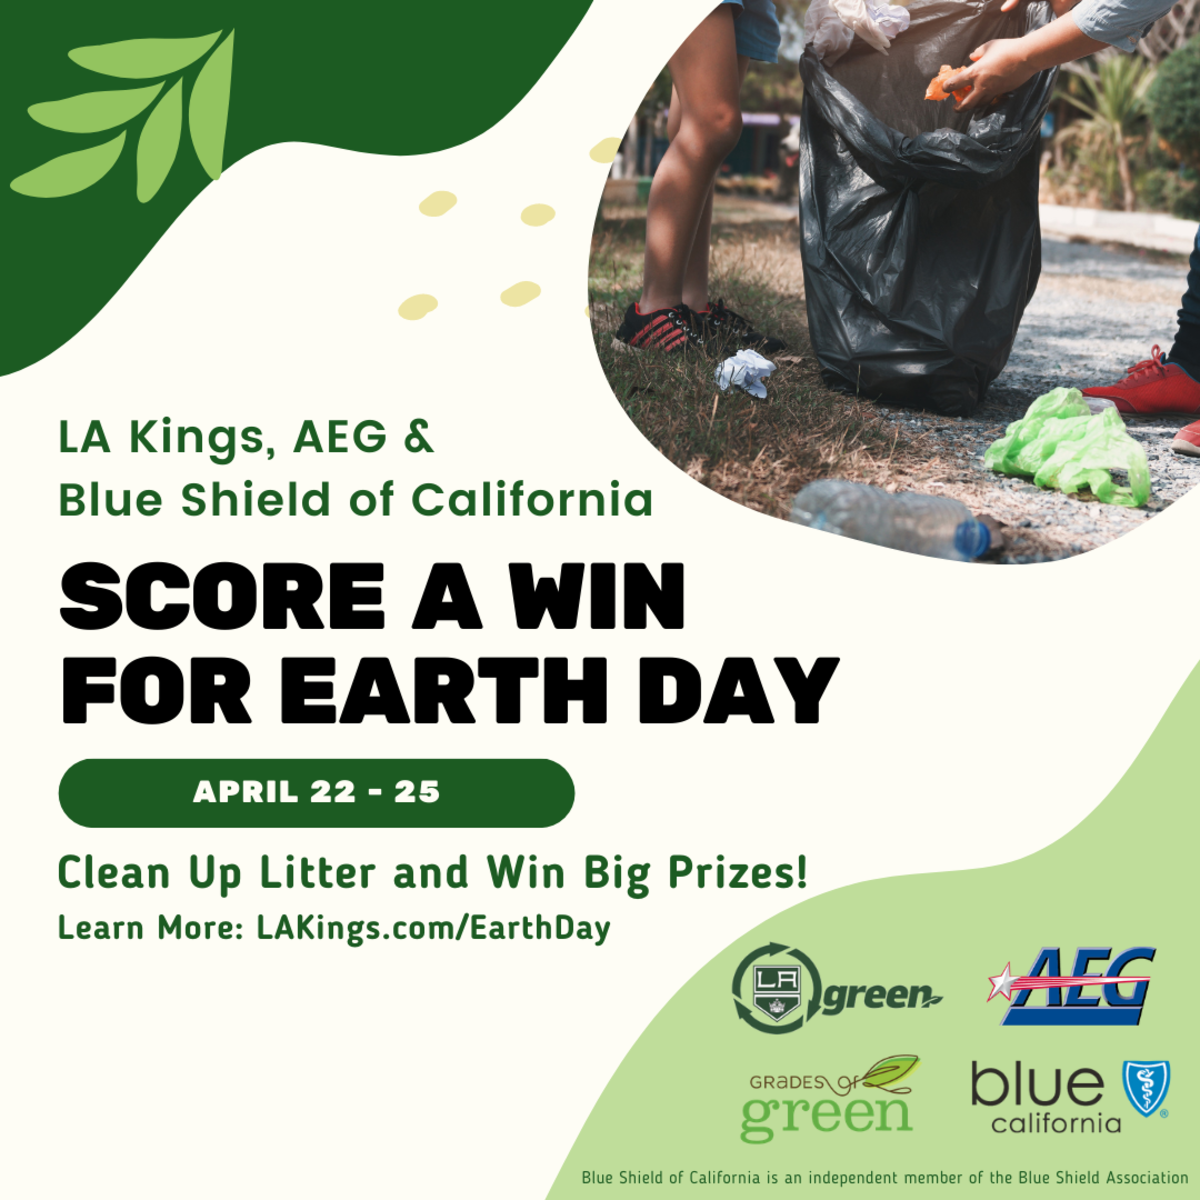 AEG and LA Kings Team Up with Blue Shield of California and Grades of Green to Send Litter to the Penalty Box for Earth Week